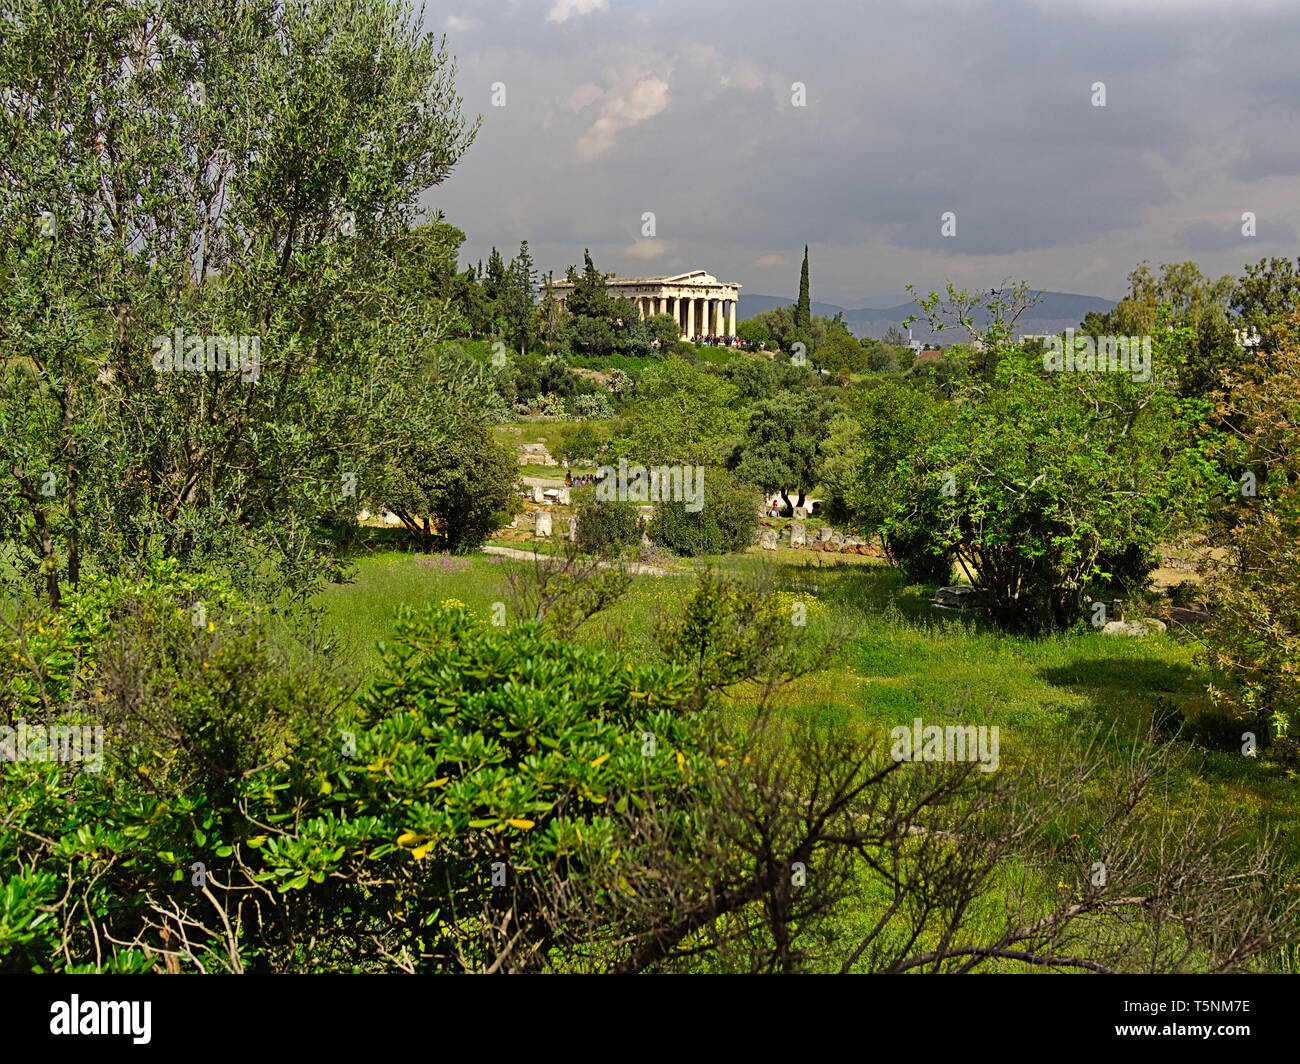 Temple of Hephaestus in Athens, Greece. Landscape with olive trees cloudy sky, bright light, and ancient greek temple. Stock Photo